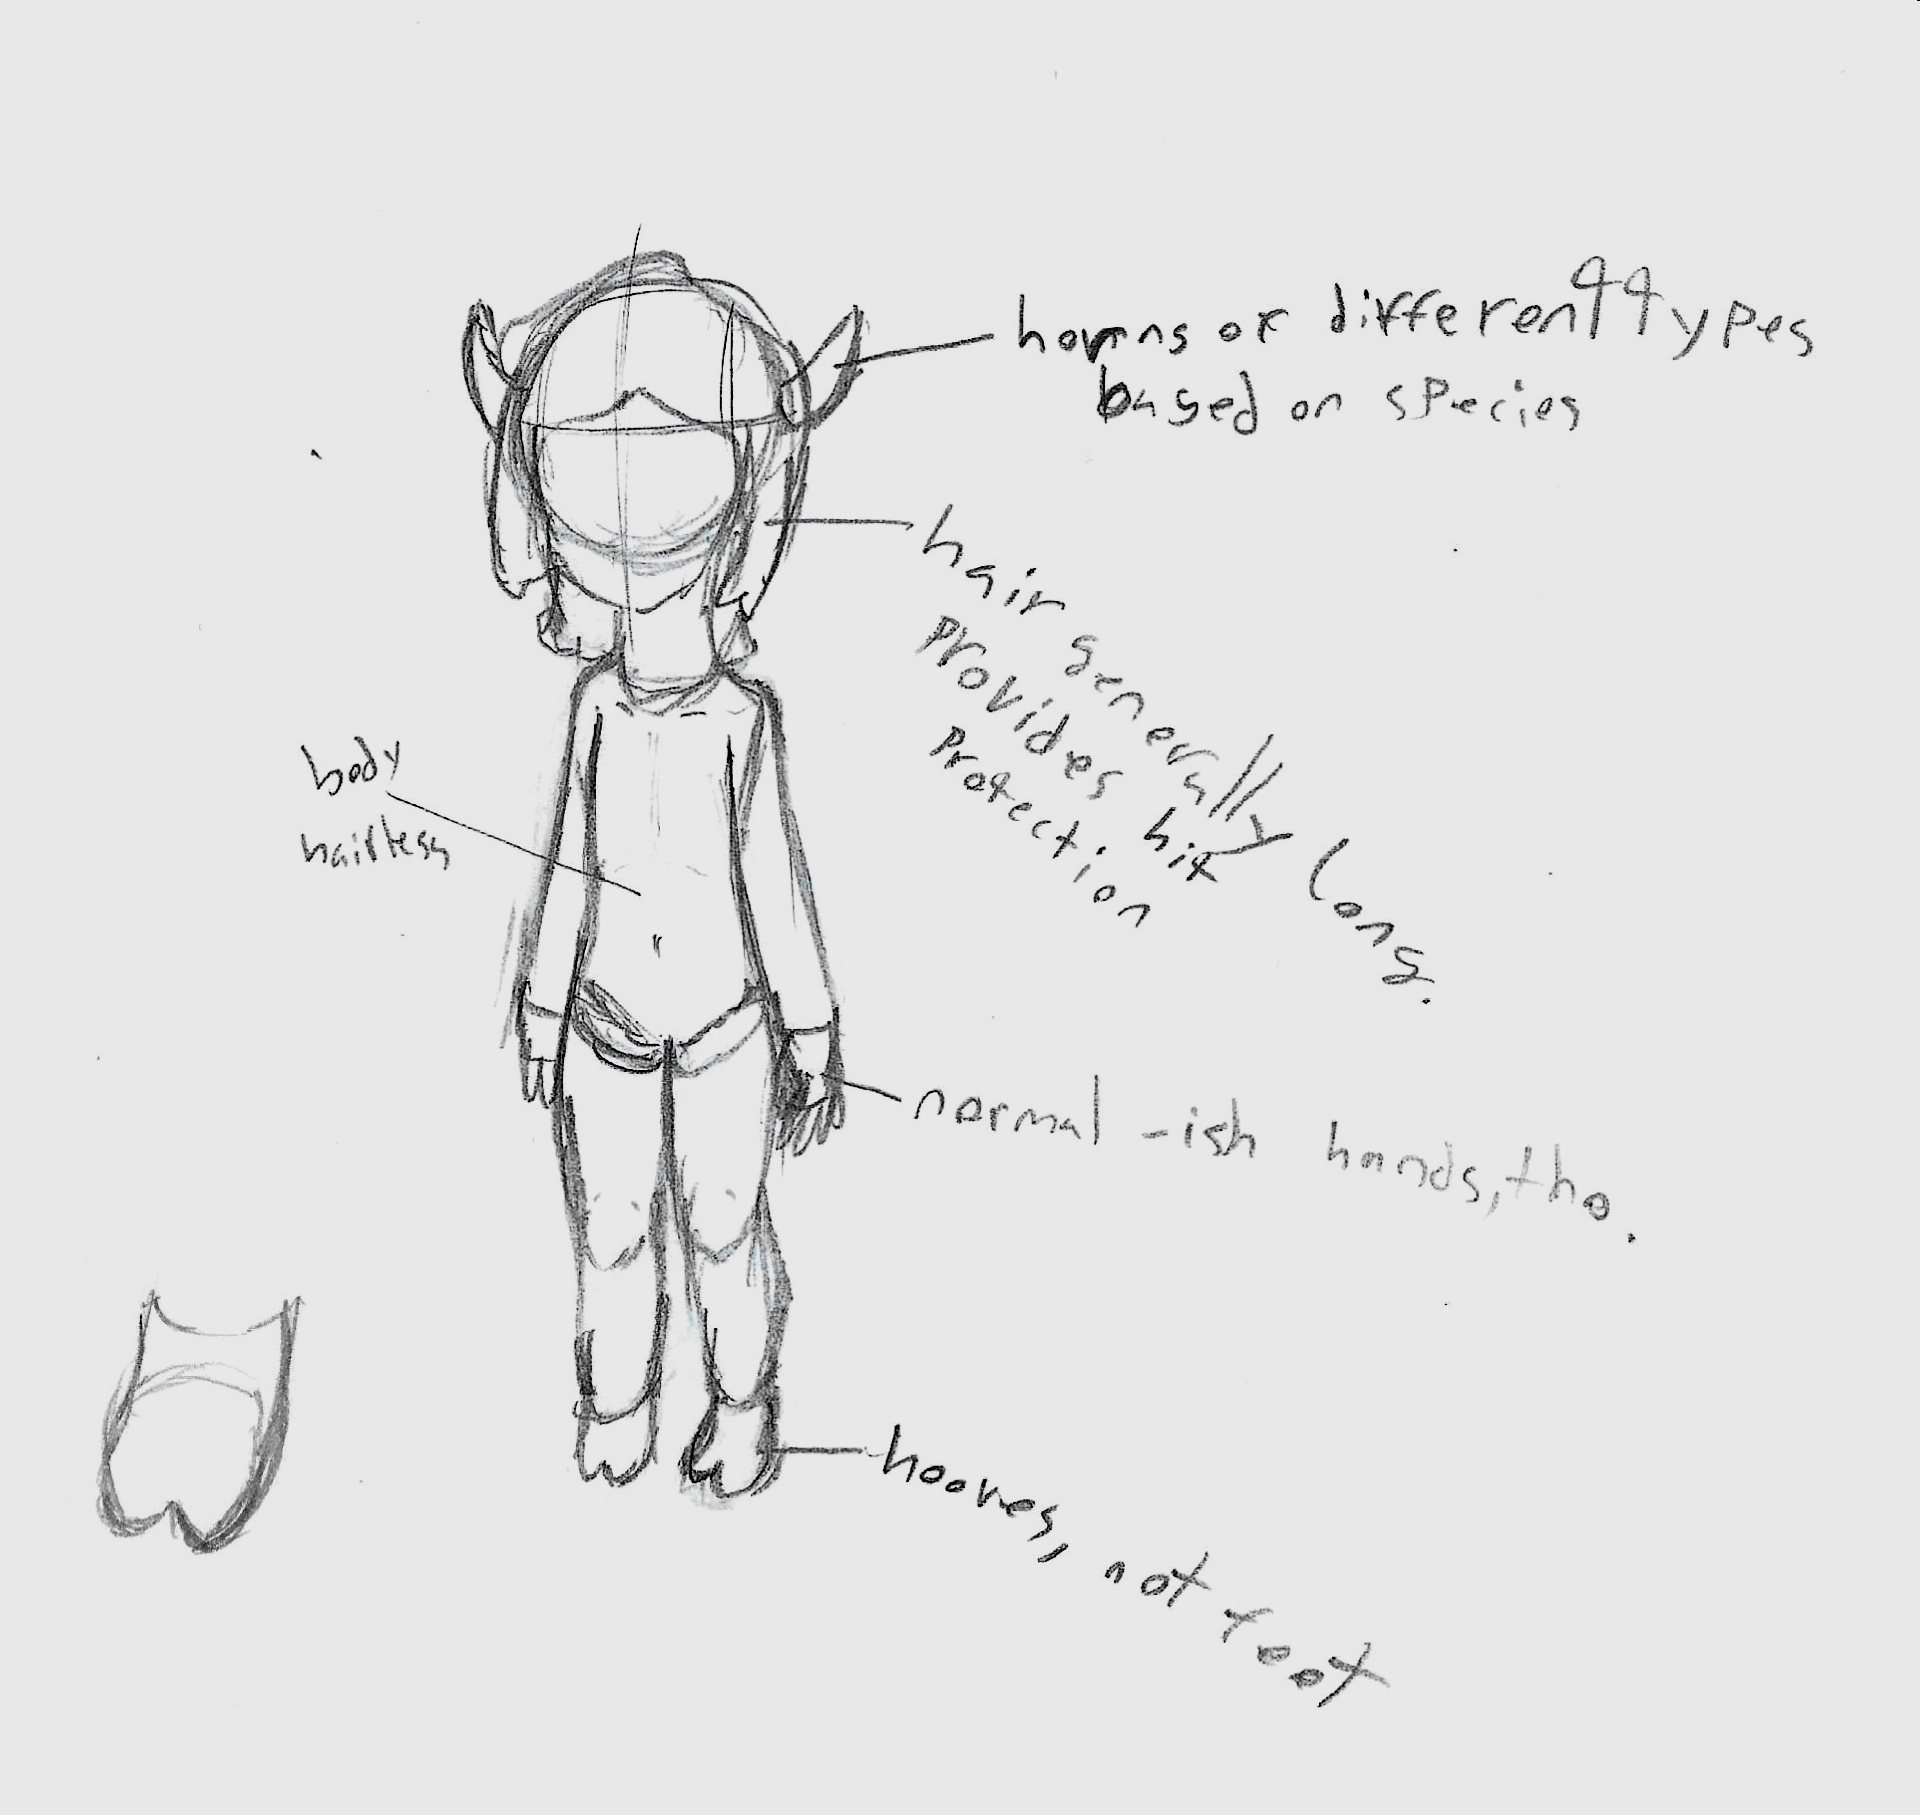 If you have a screenreader, can’t read my terrible handwriting, or i forgot to upload the image, this is what it says:
They have horns of different types, depending on species.
Their hair is generally long, and provides hit protection.
Their body is hairless.
They have hooves, not feet.
They have human(-ish) hands.